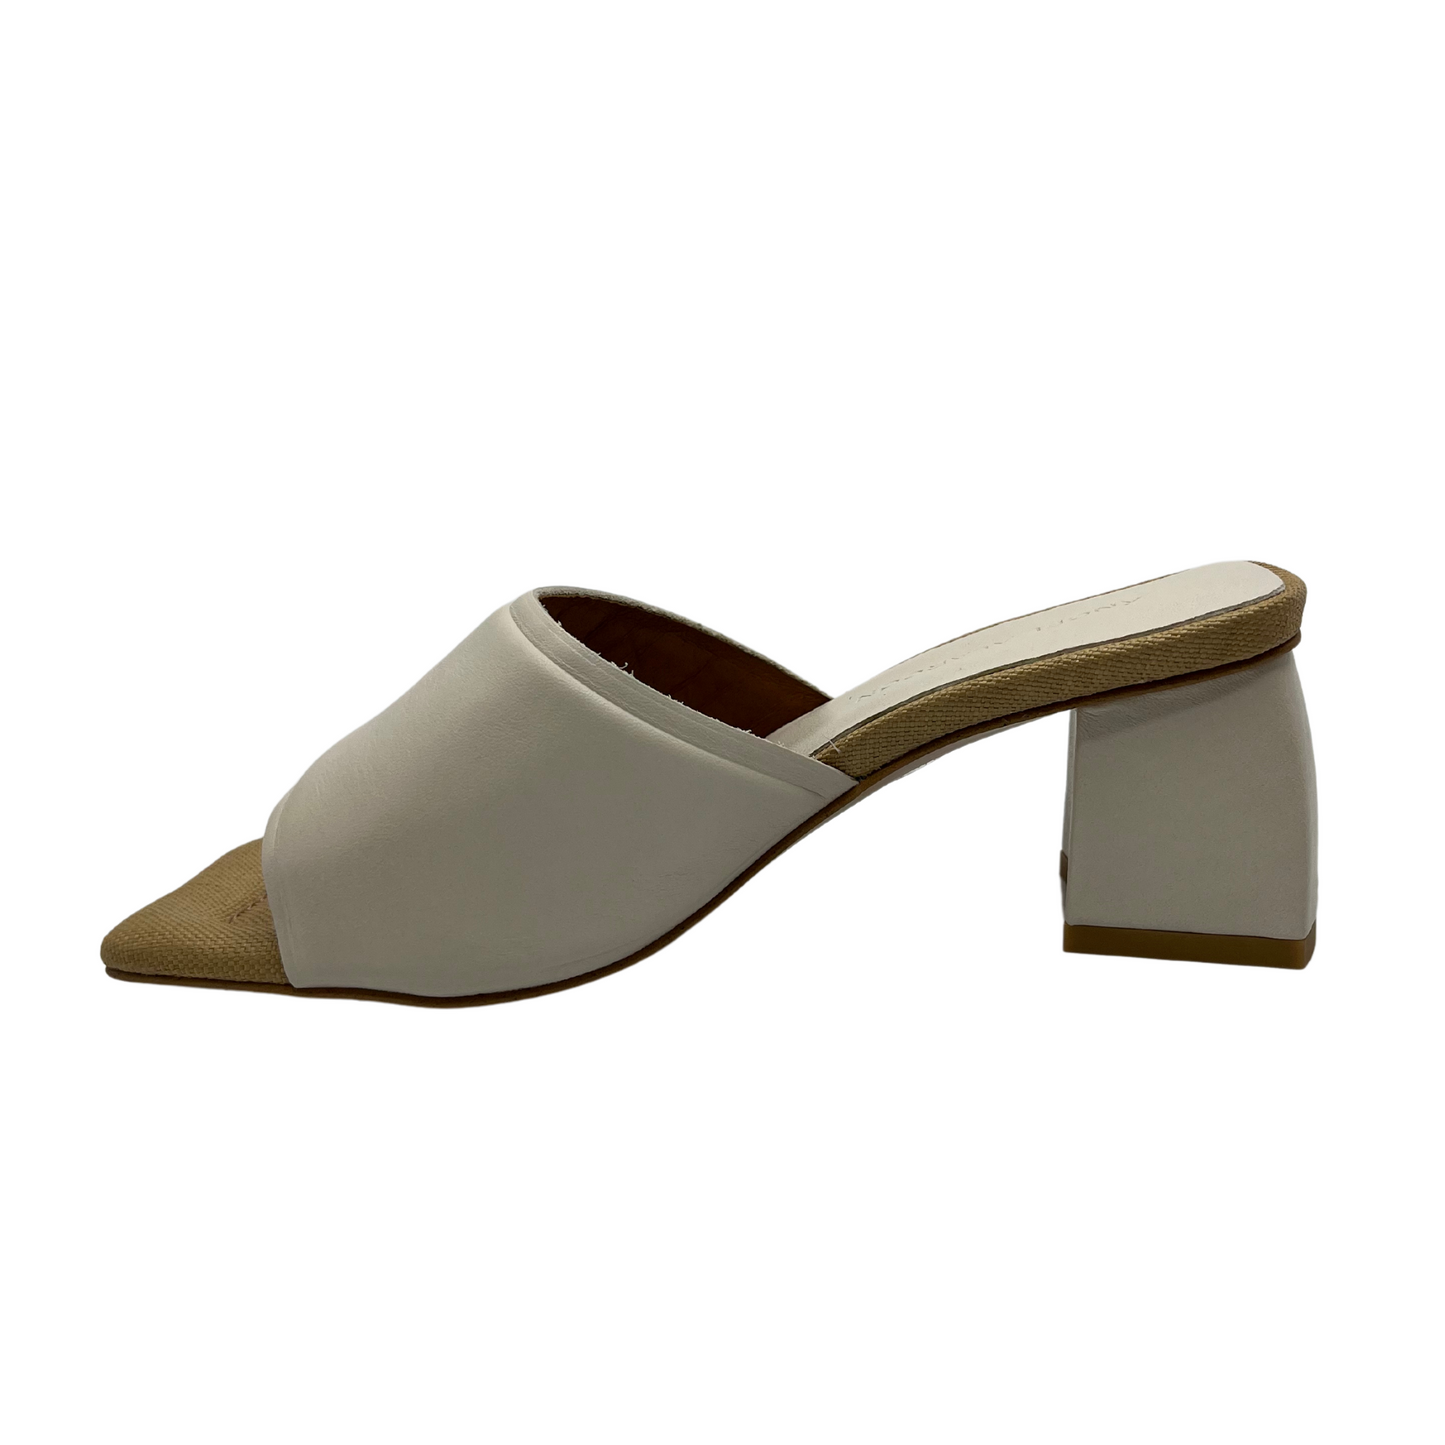 Left facing view of cream coloured leather slip on sandal with square toe, wrapped block heel and padded insole